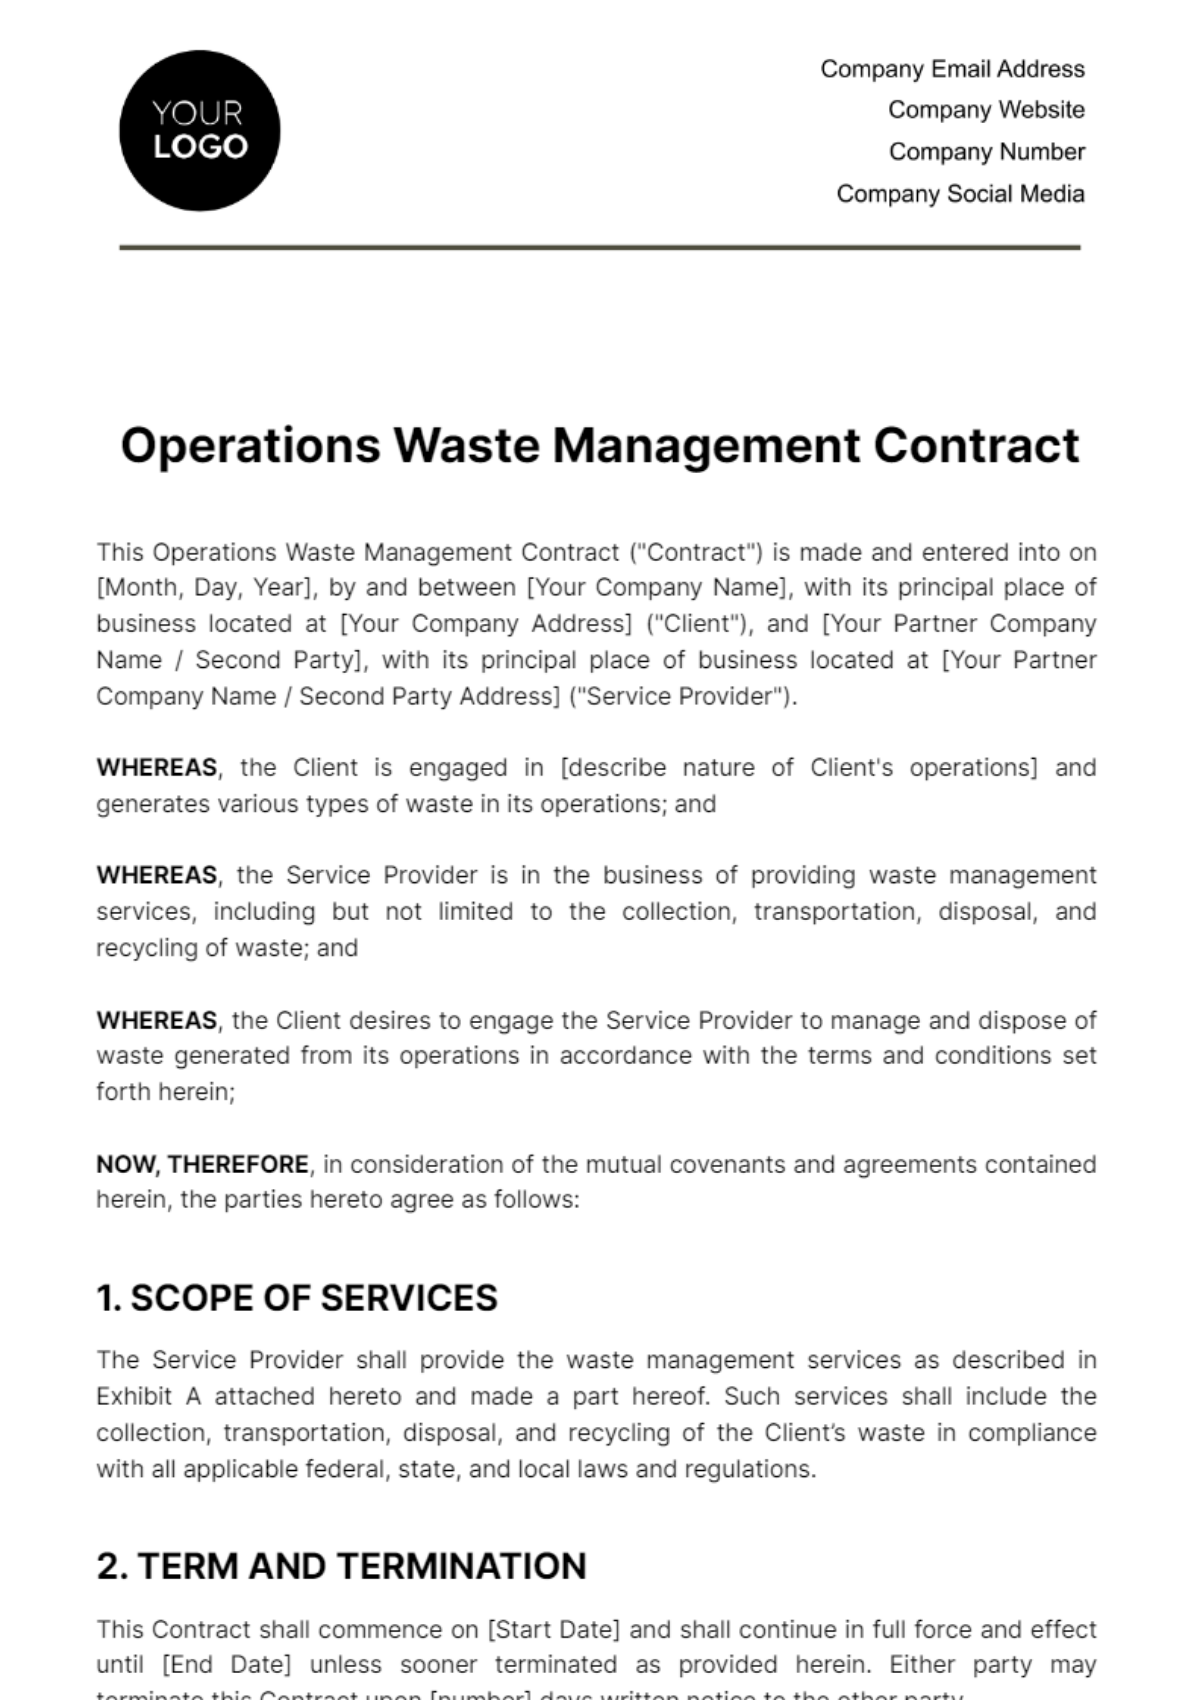 Free Operations Waste Management Contract Template